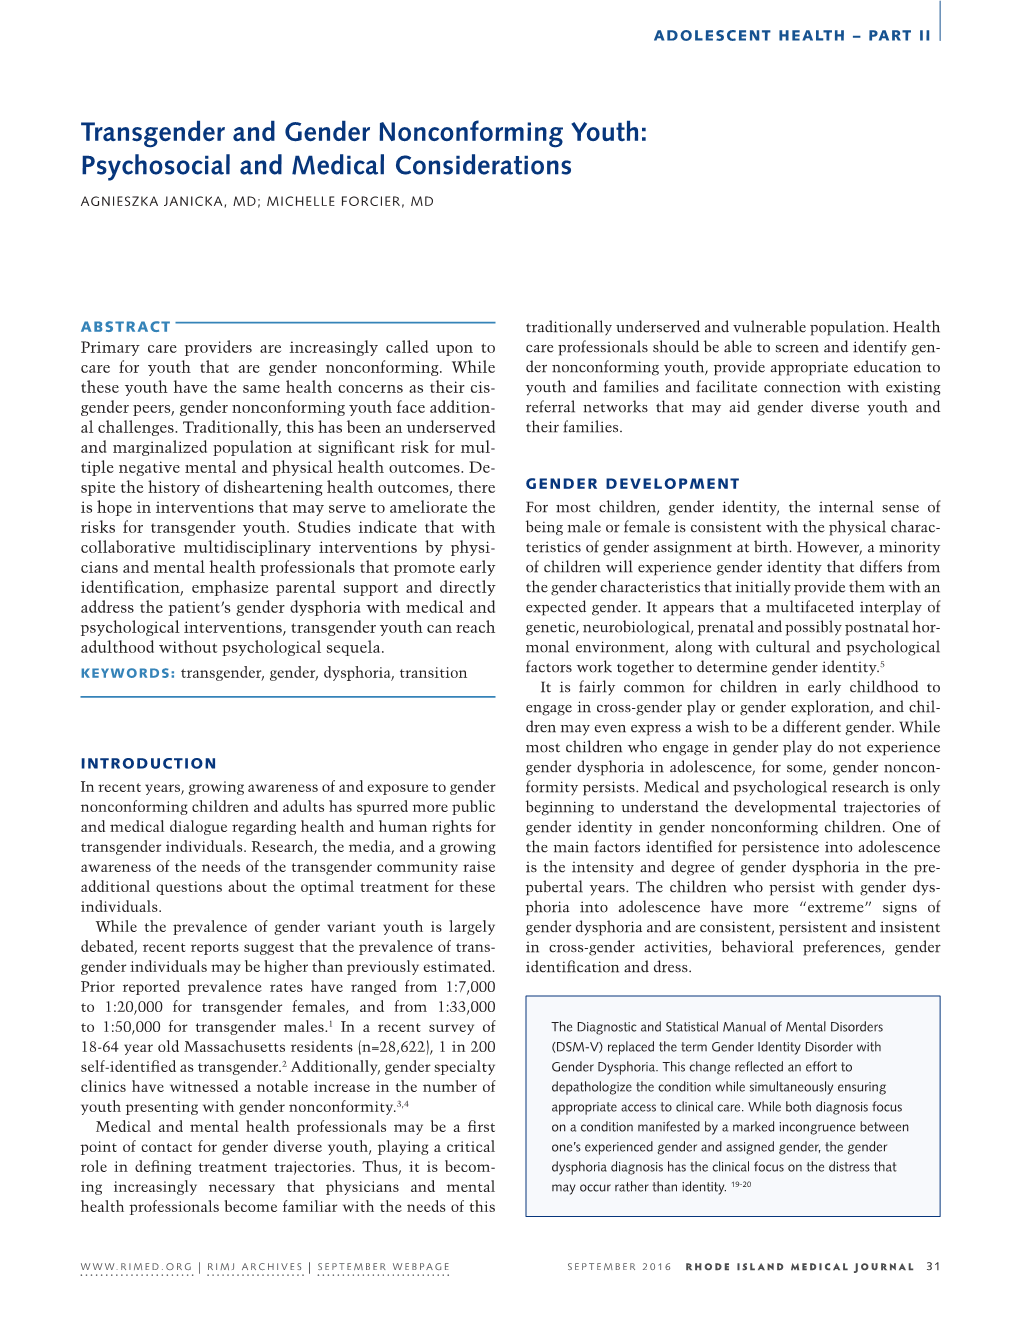 Transgender and Gender Nonconforming Youth: Psychosocial and Medical Considerations